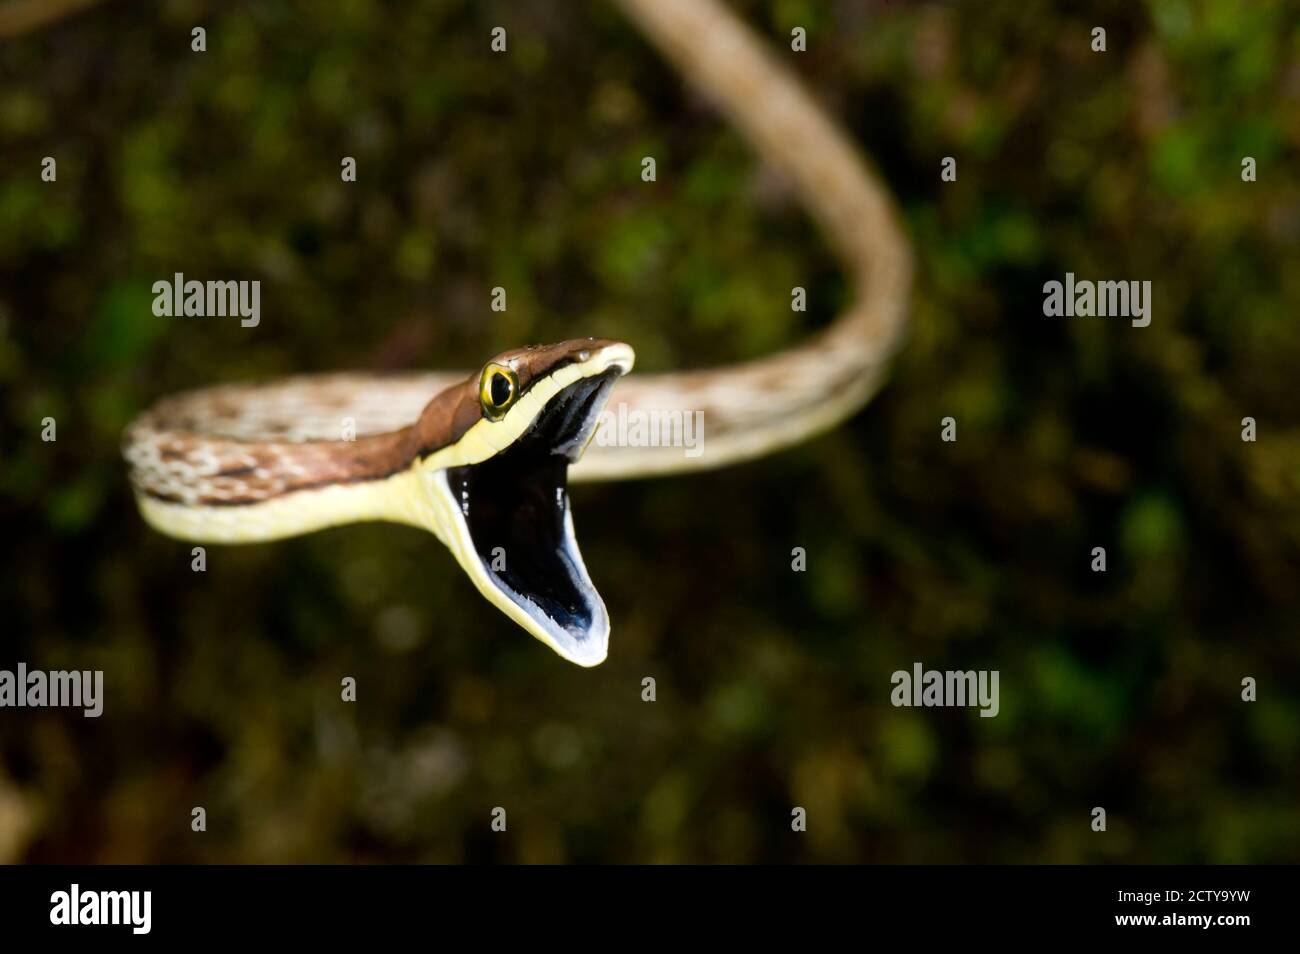 Close-up of a Vine snake with its mouth open, Costa Rica Stock Photo